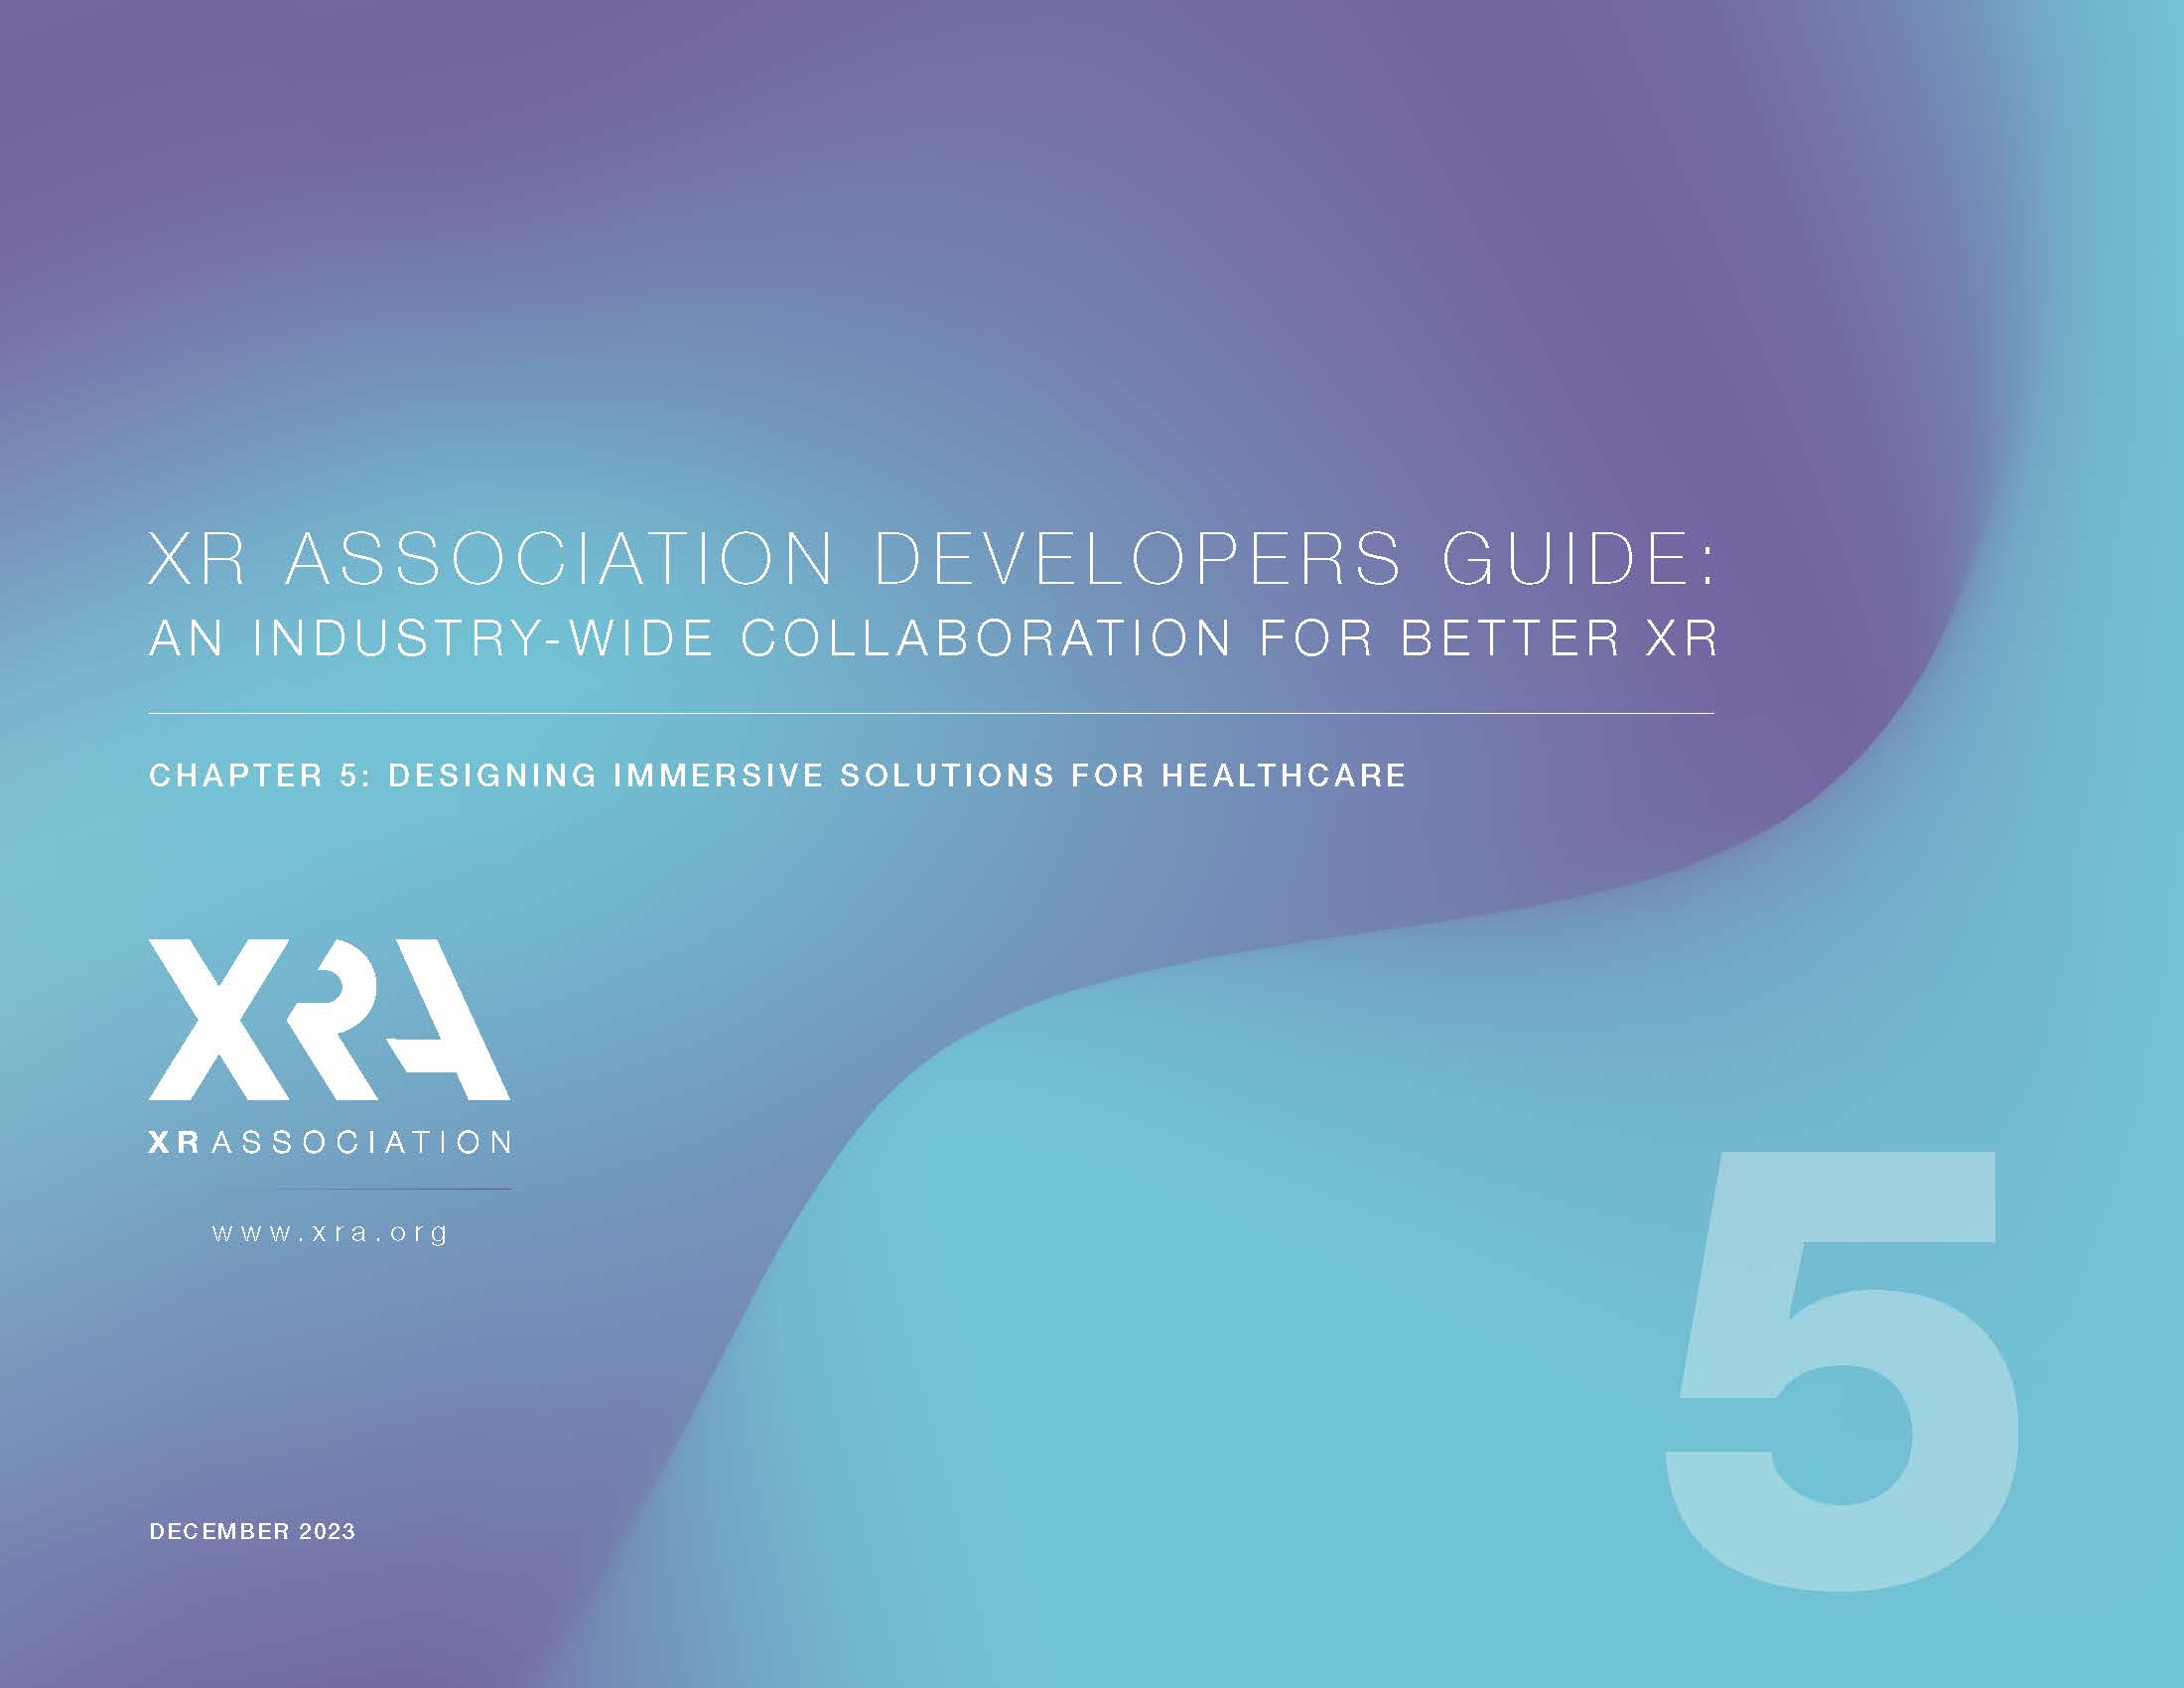 XRA’S DEVELOPERS GUIDE, CHAPTER FIVE: Designing Immersive Solutions for Healthcare